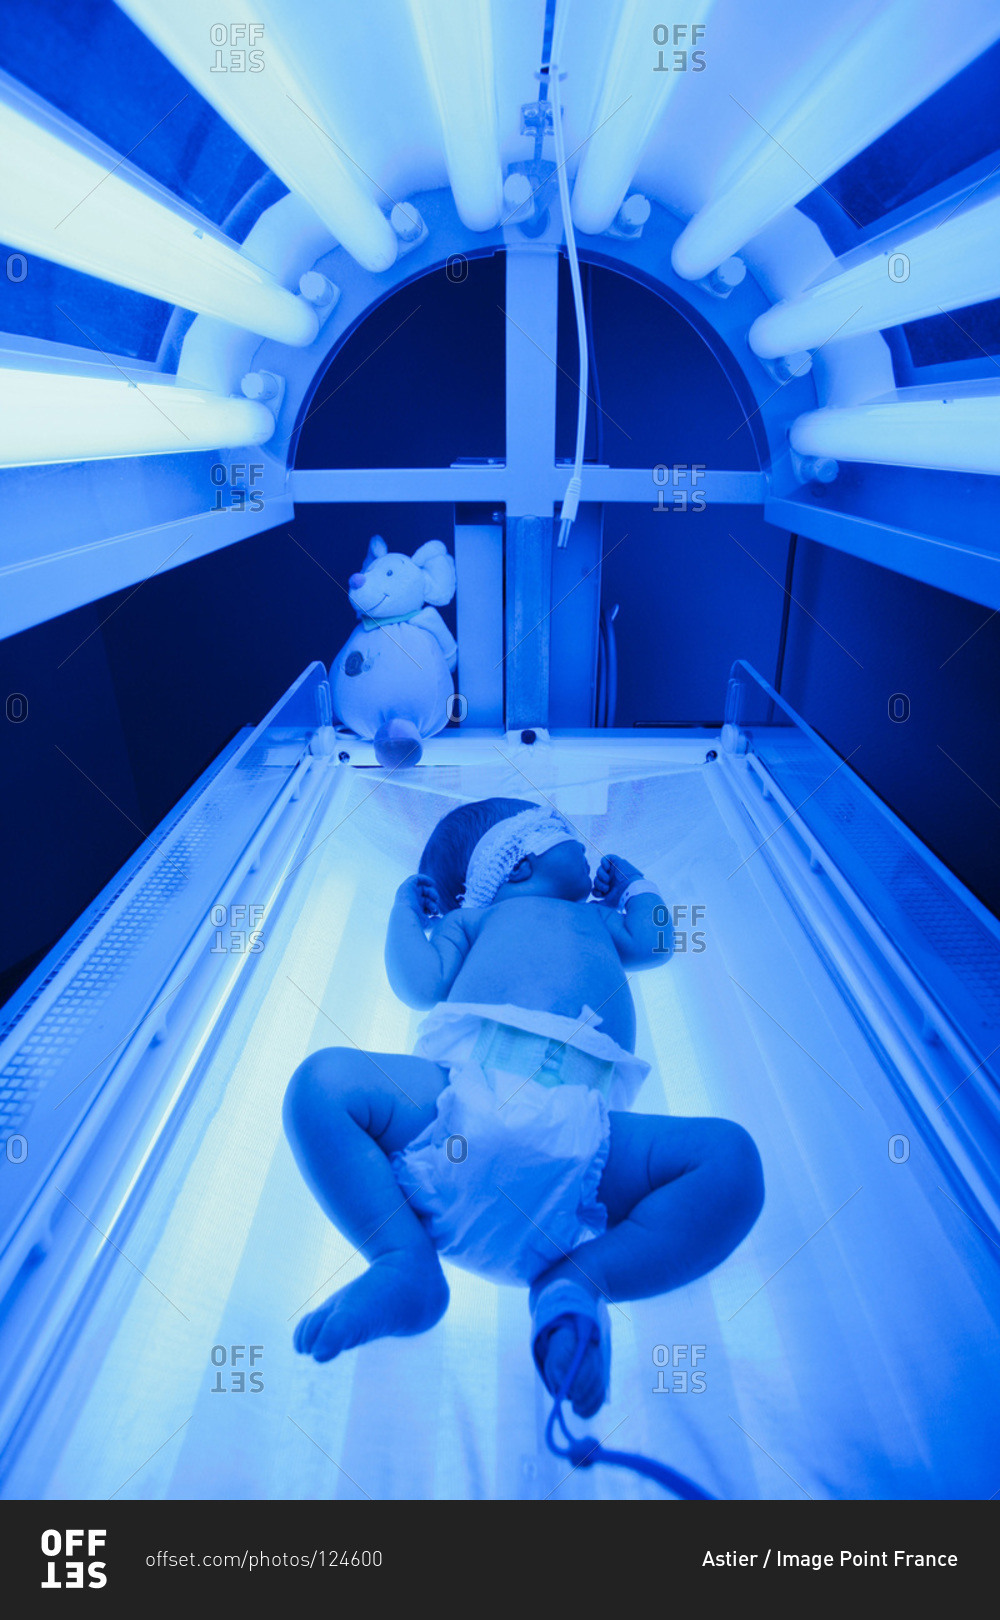 Phototherapy for a newborn baby with a high rate of bilirubine (jaundice).